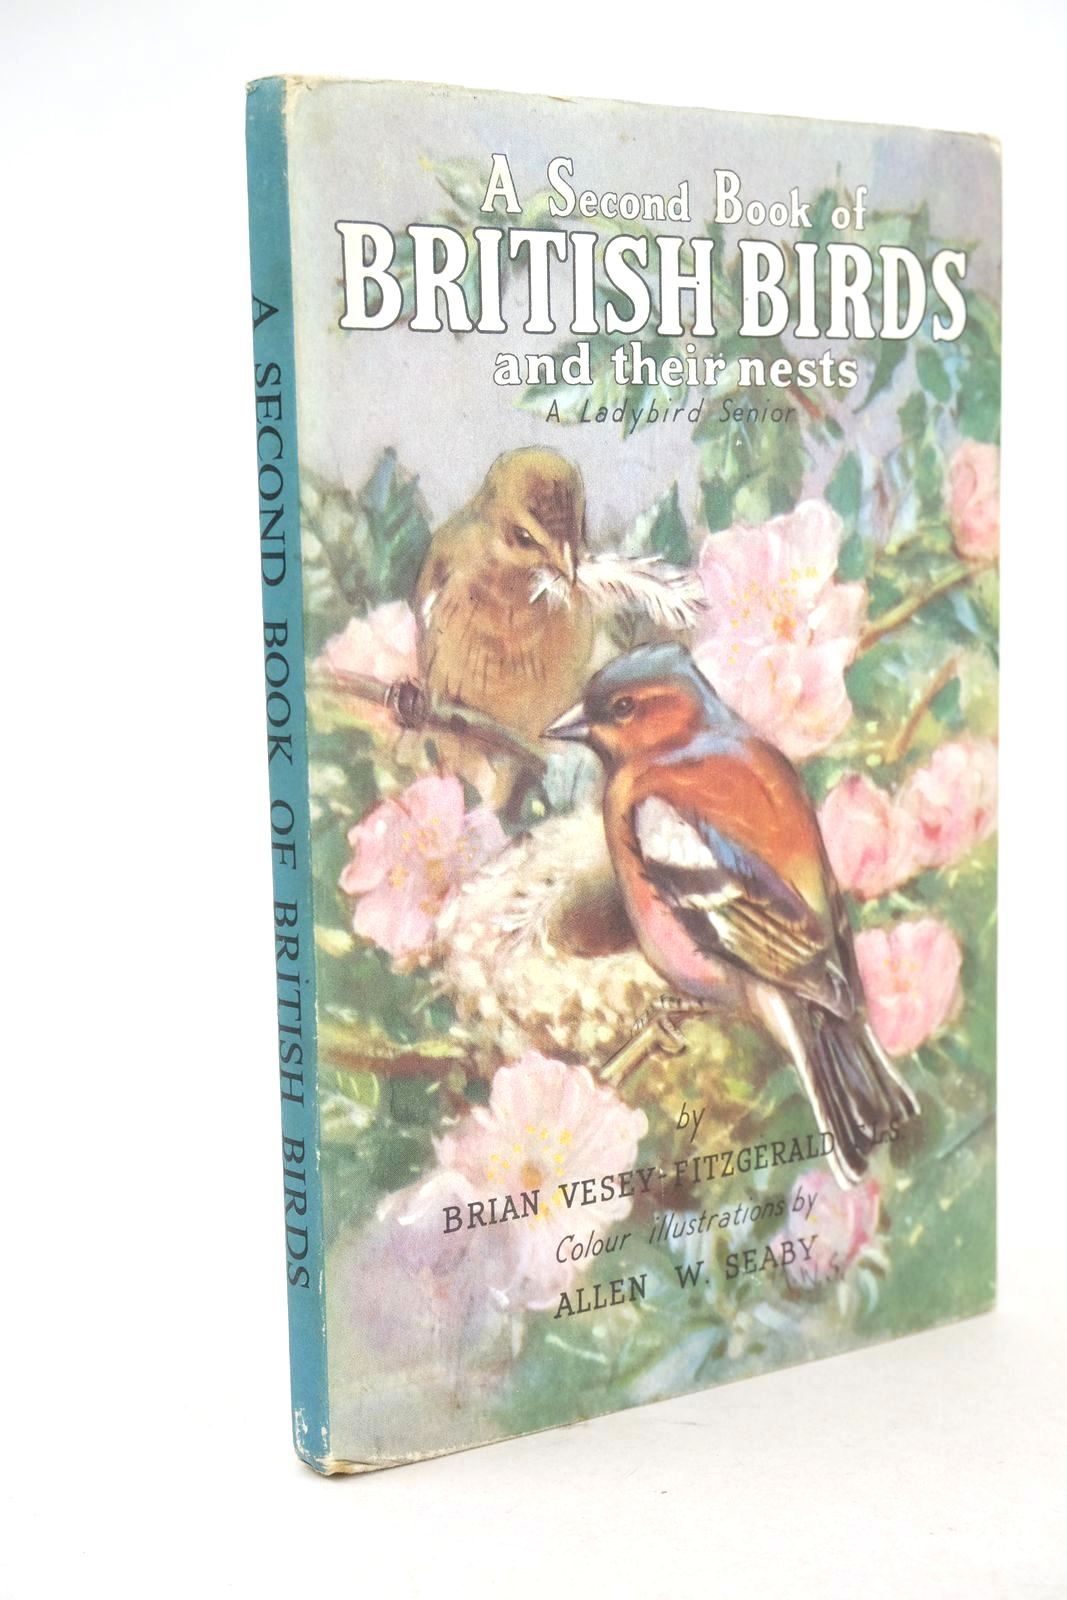 Photo of A SECOND BOOK OF BRITISH BIRDS AND THEIR NESTS written by Vesey-Fitzgerald, Brian illustrated by Seaby, Allen W. published by Wills & Hepworth Ltd. (STOCK CODE: 1325754)  for sale by Stella & Rose's Books